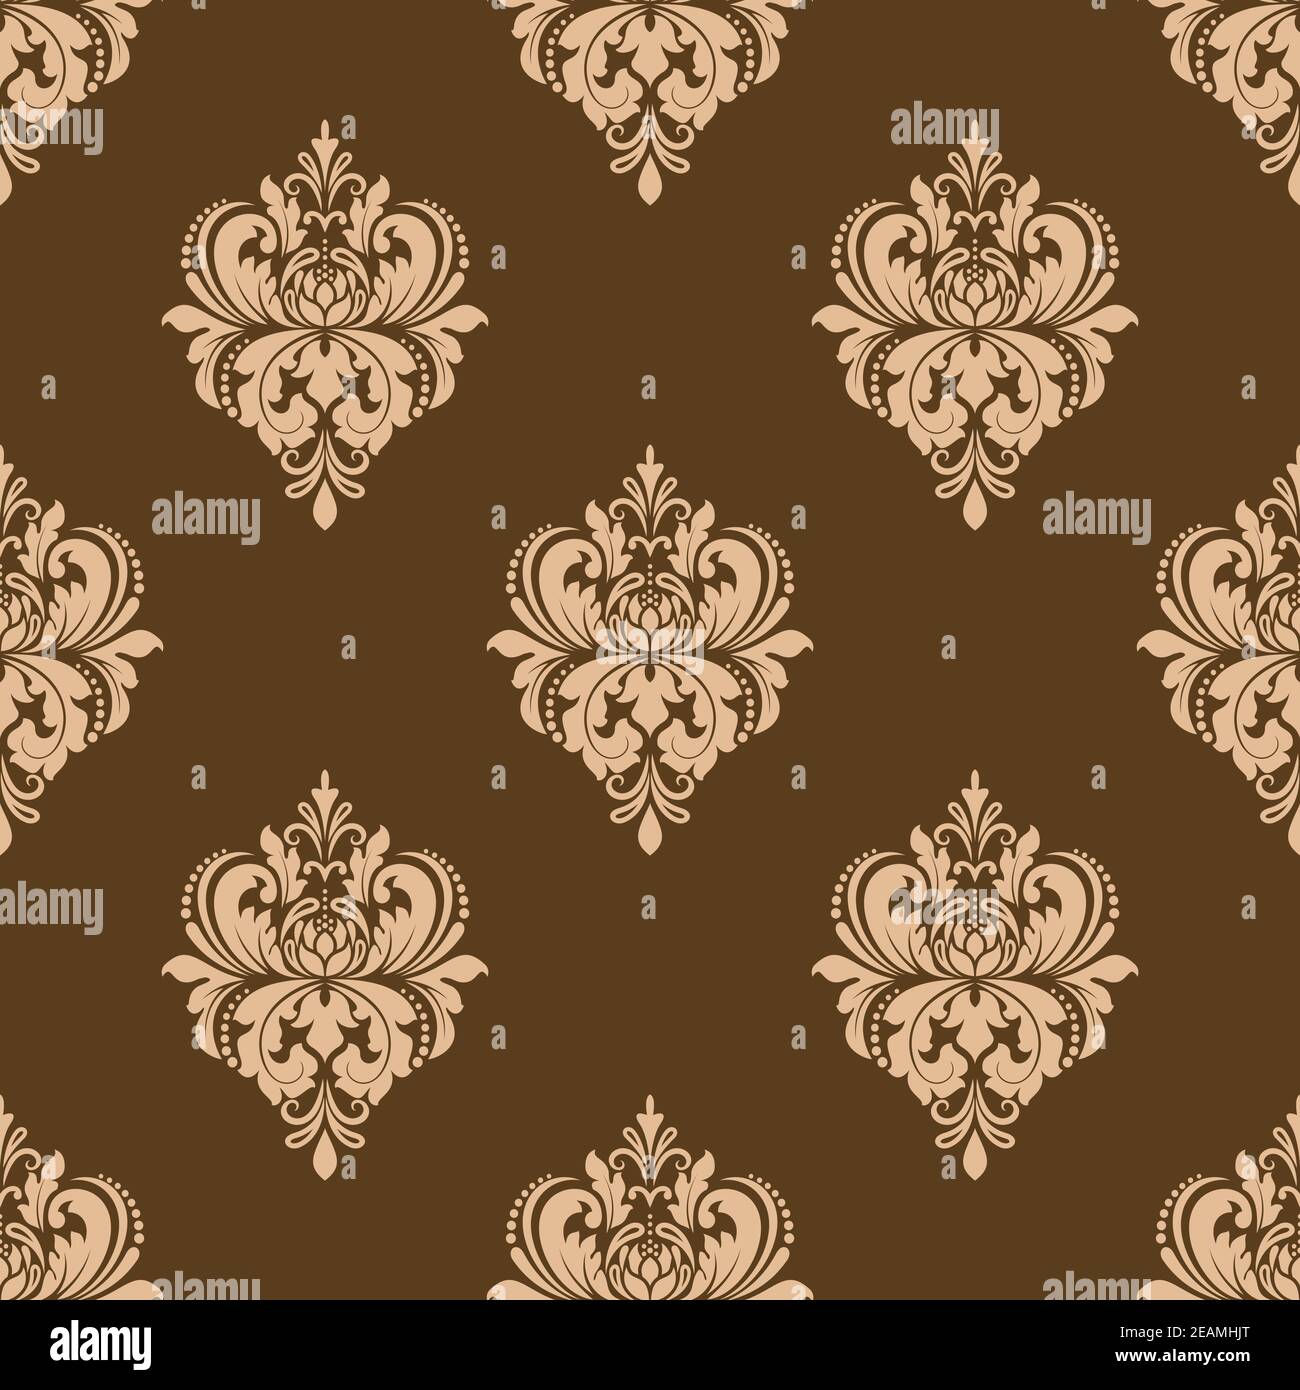 Buy 981001 Dark Brown  Wallpaper Wooden Wallpaper Wallpaper Study Wall  Background Coffee Shop Clothing Store Wallpaper 981001 Dark Brown Online  at Low Prices in India  Amazonin